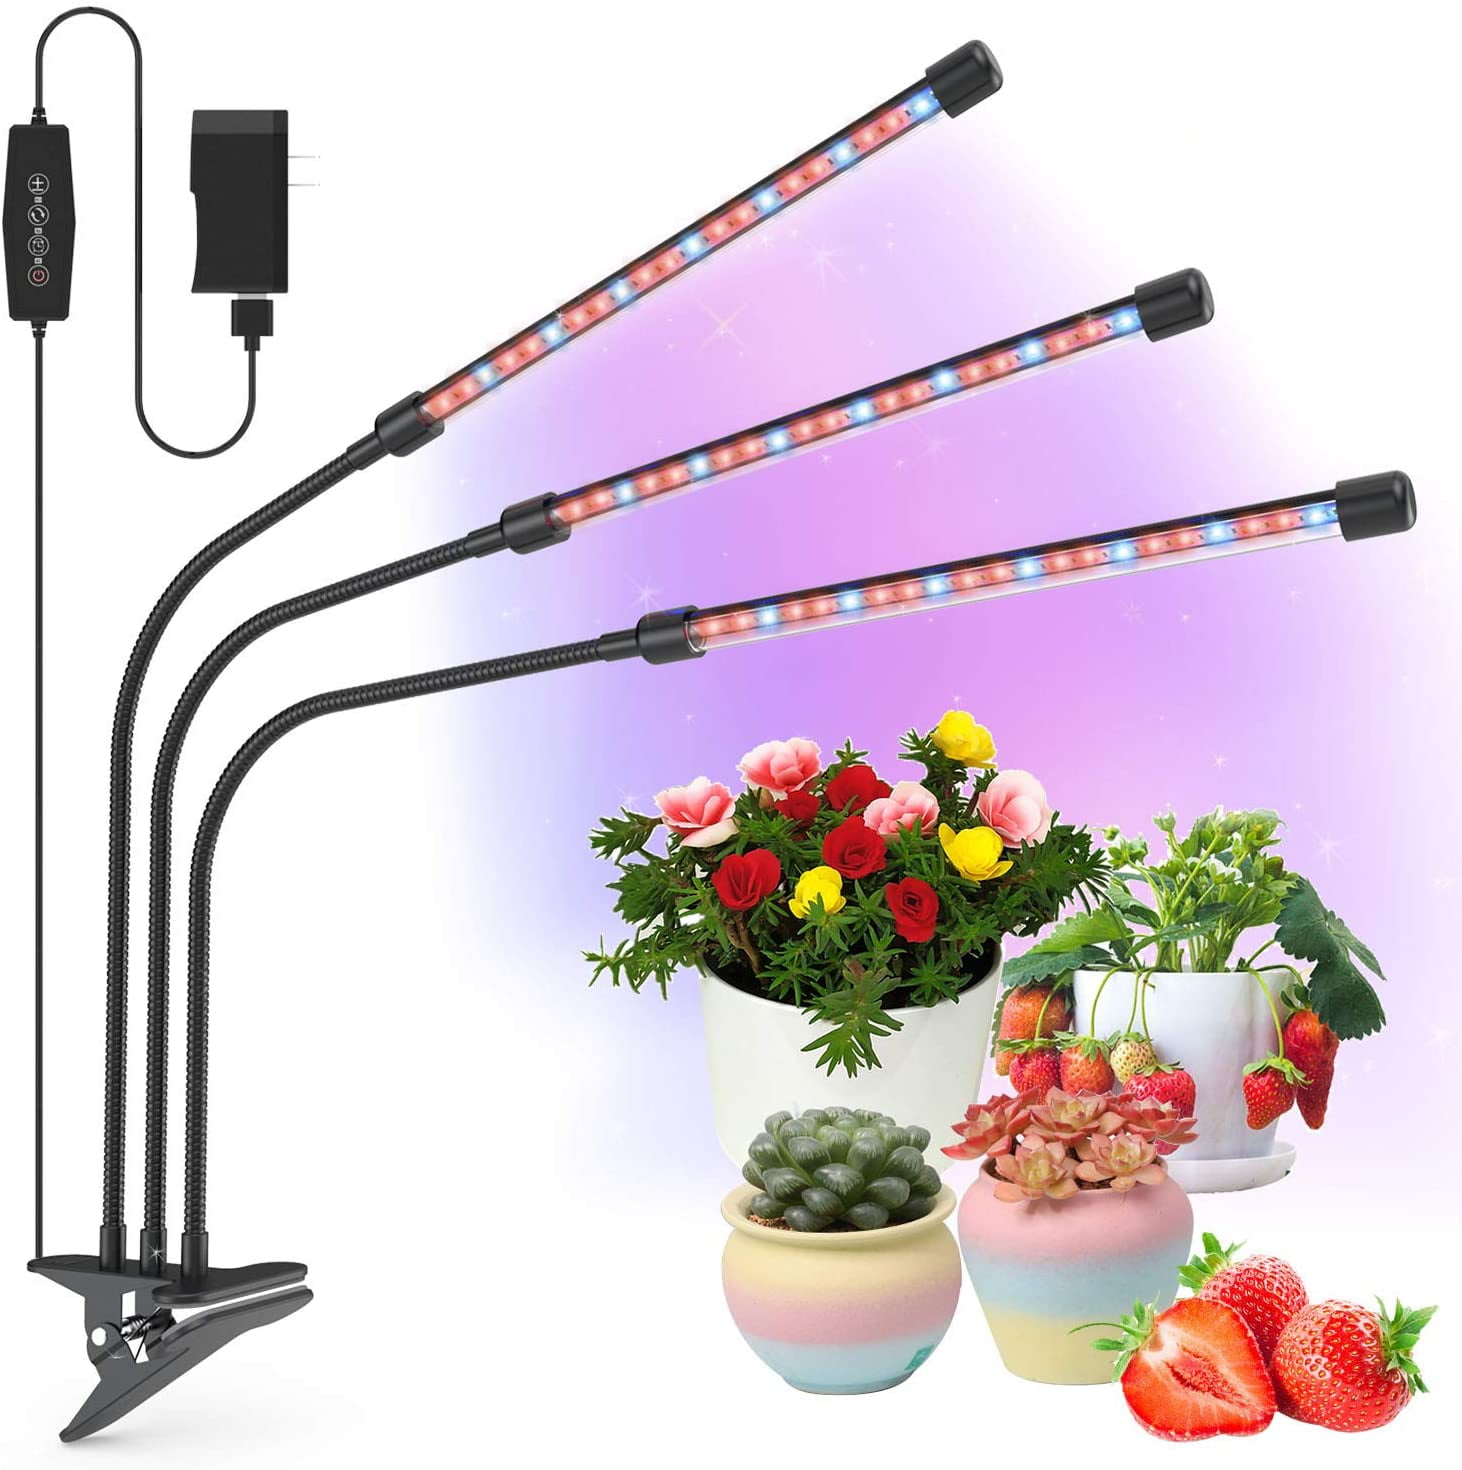 30W LED Grow Lights Full Spectrum For Indoor Hydroponics Plant Growing Lamp 